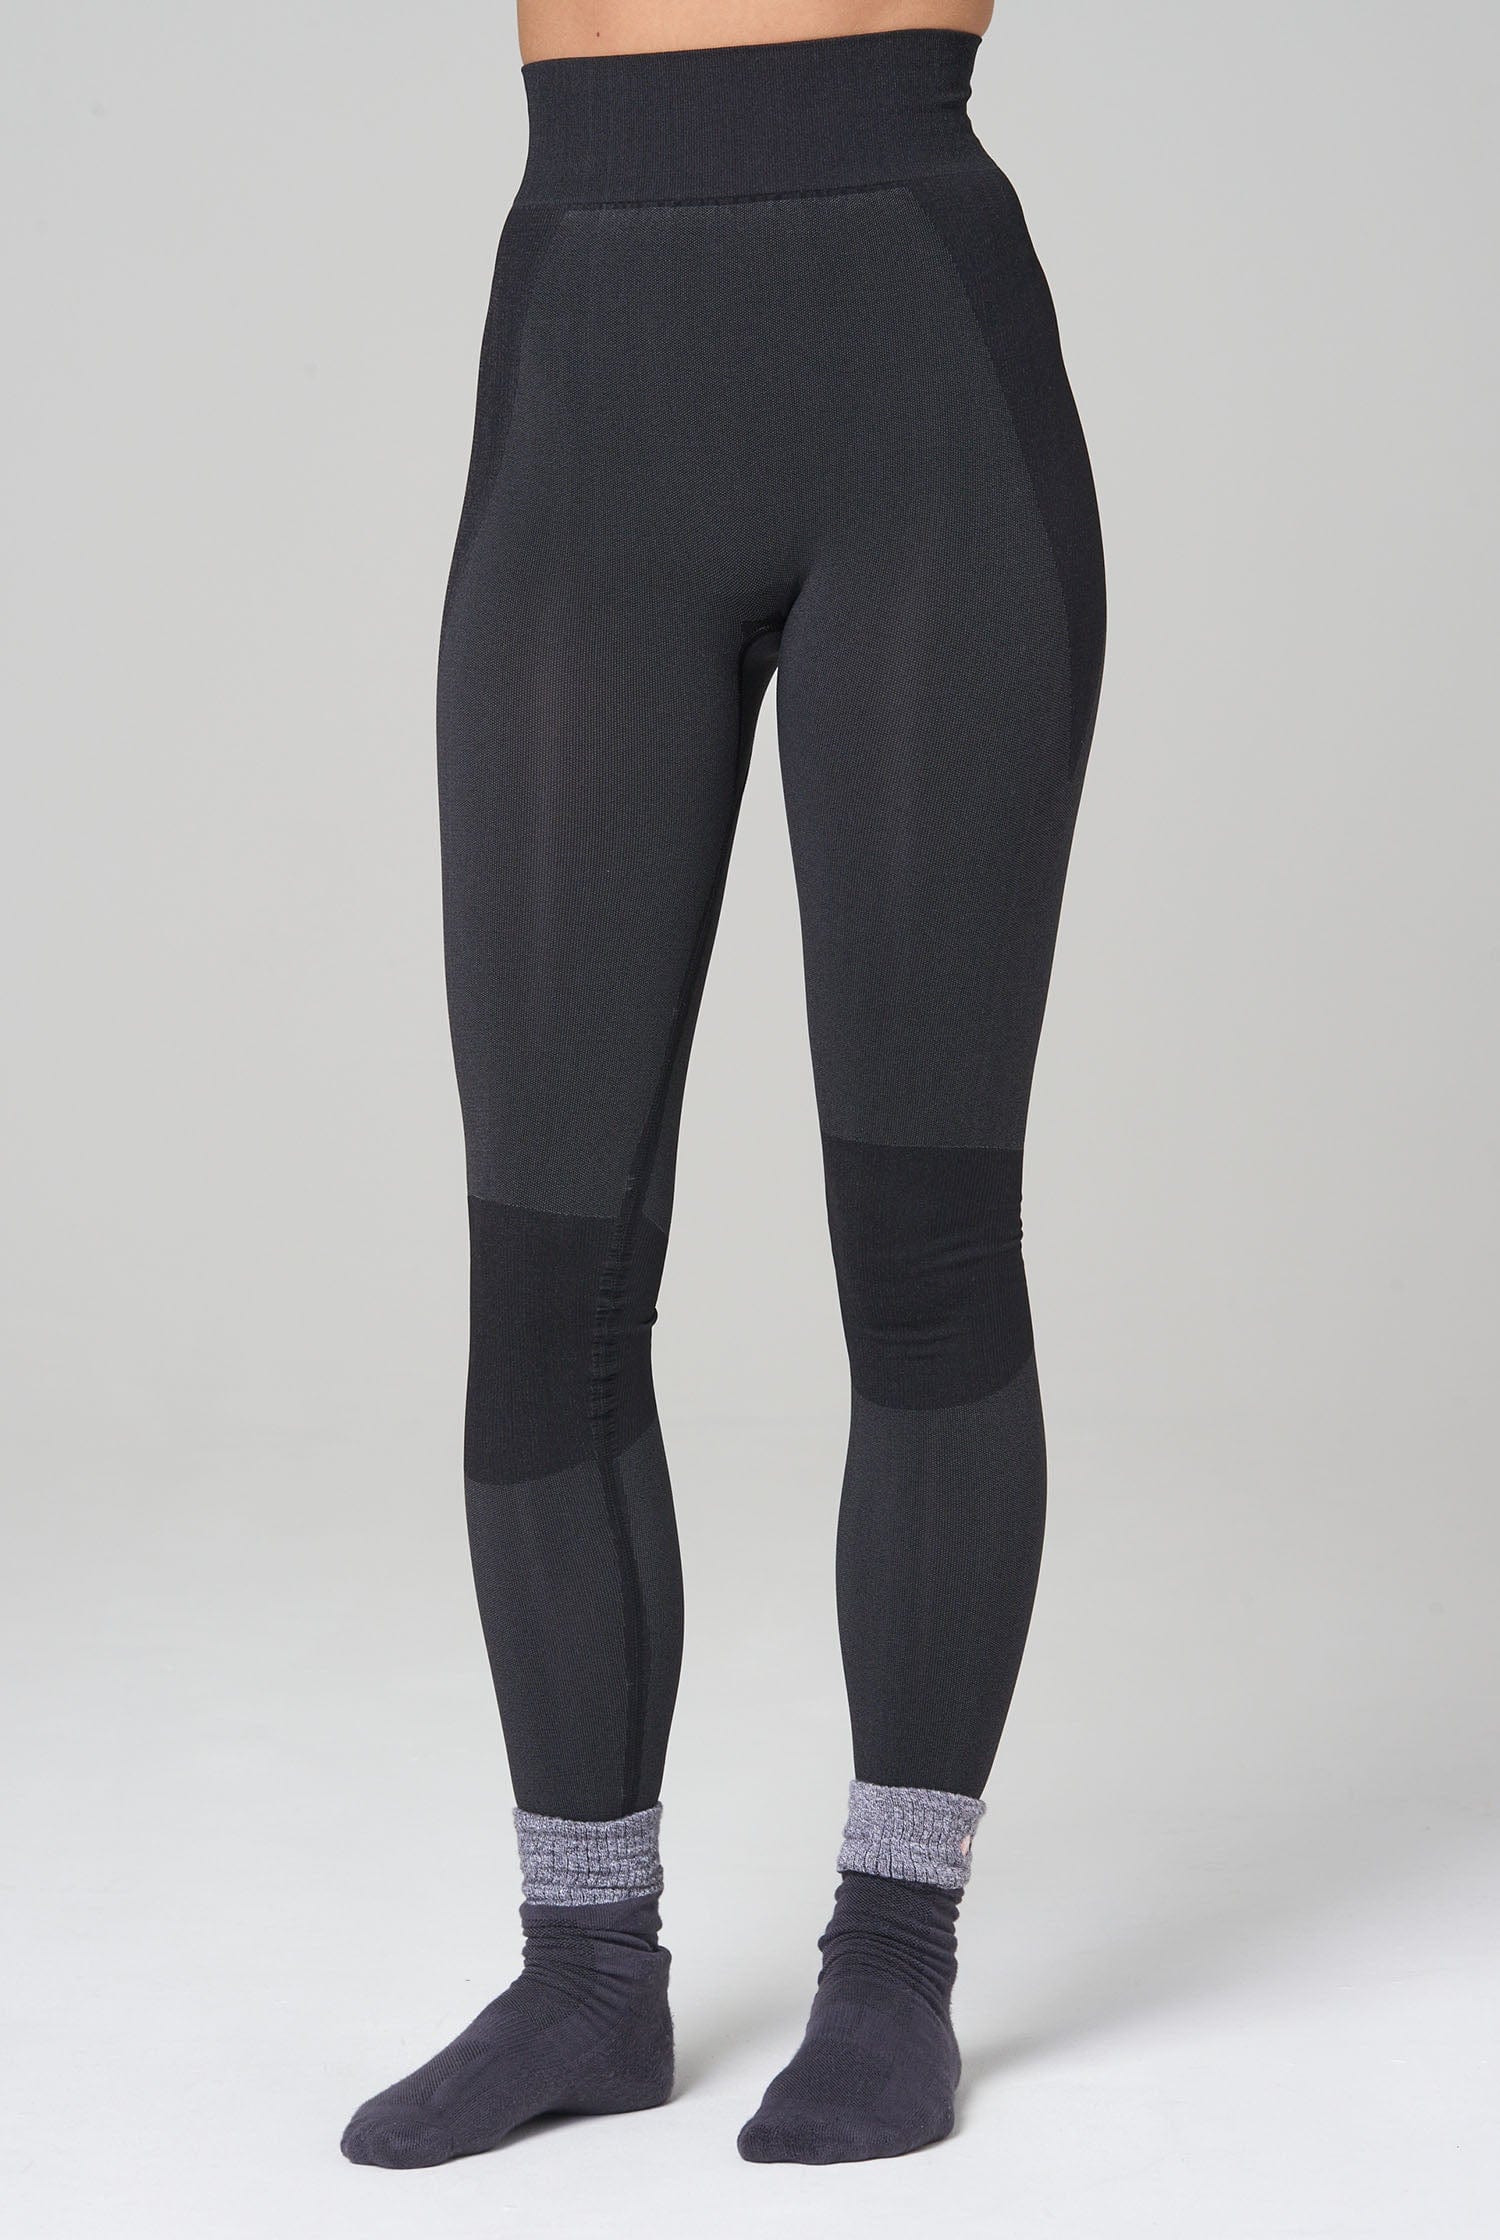 Nike Women's Element Thermal Tights